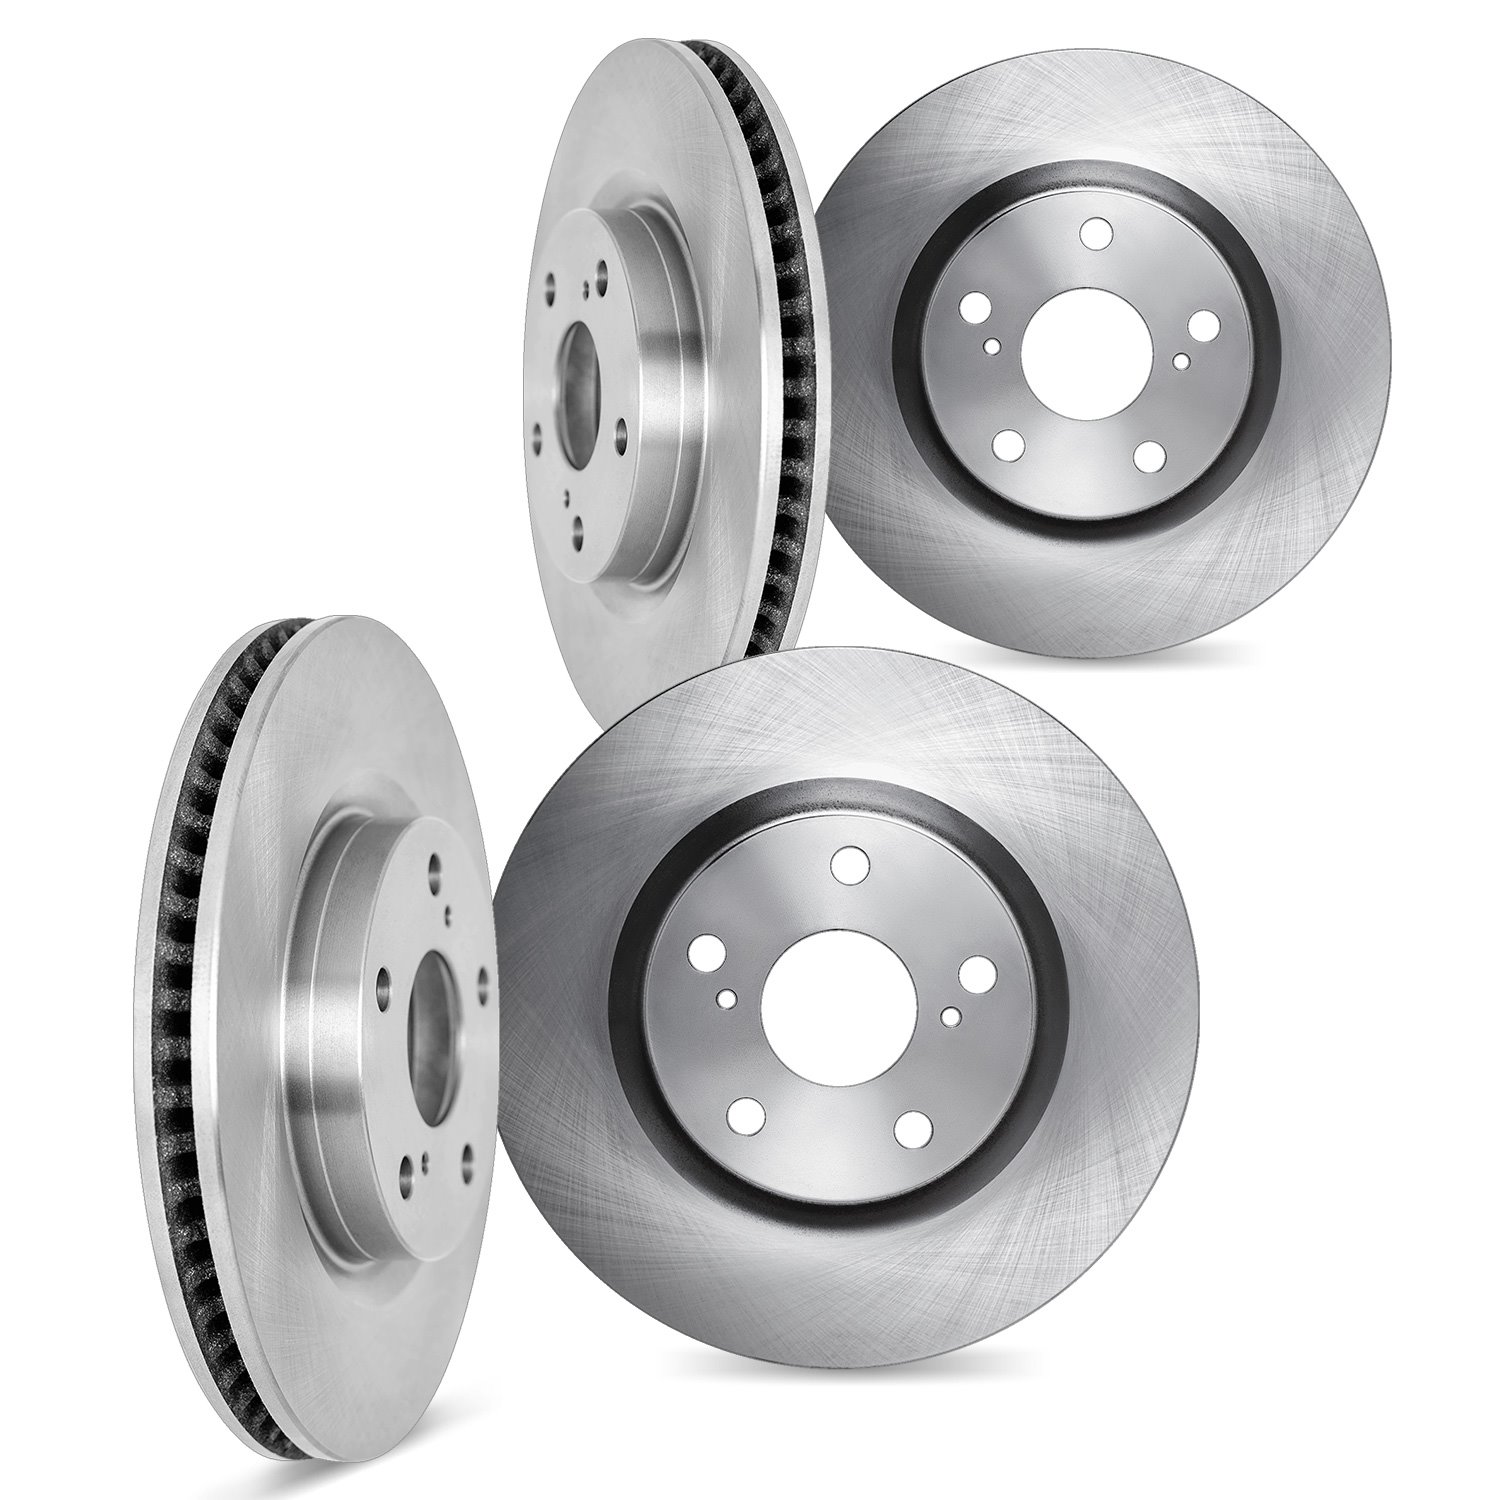 6004-31240 Brake Rotors, Fits Select BMW, Position: Front and Rear